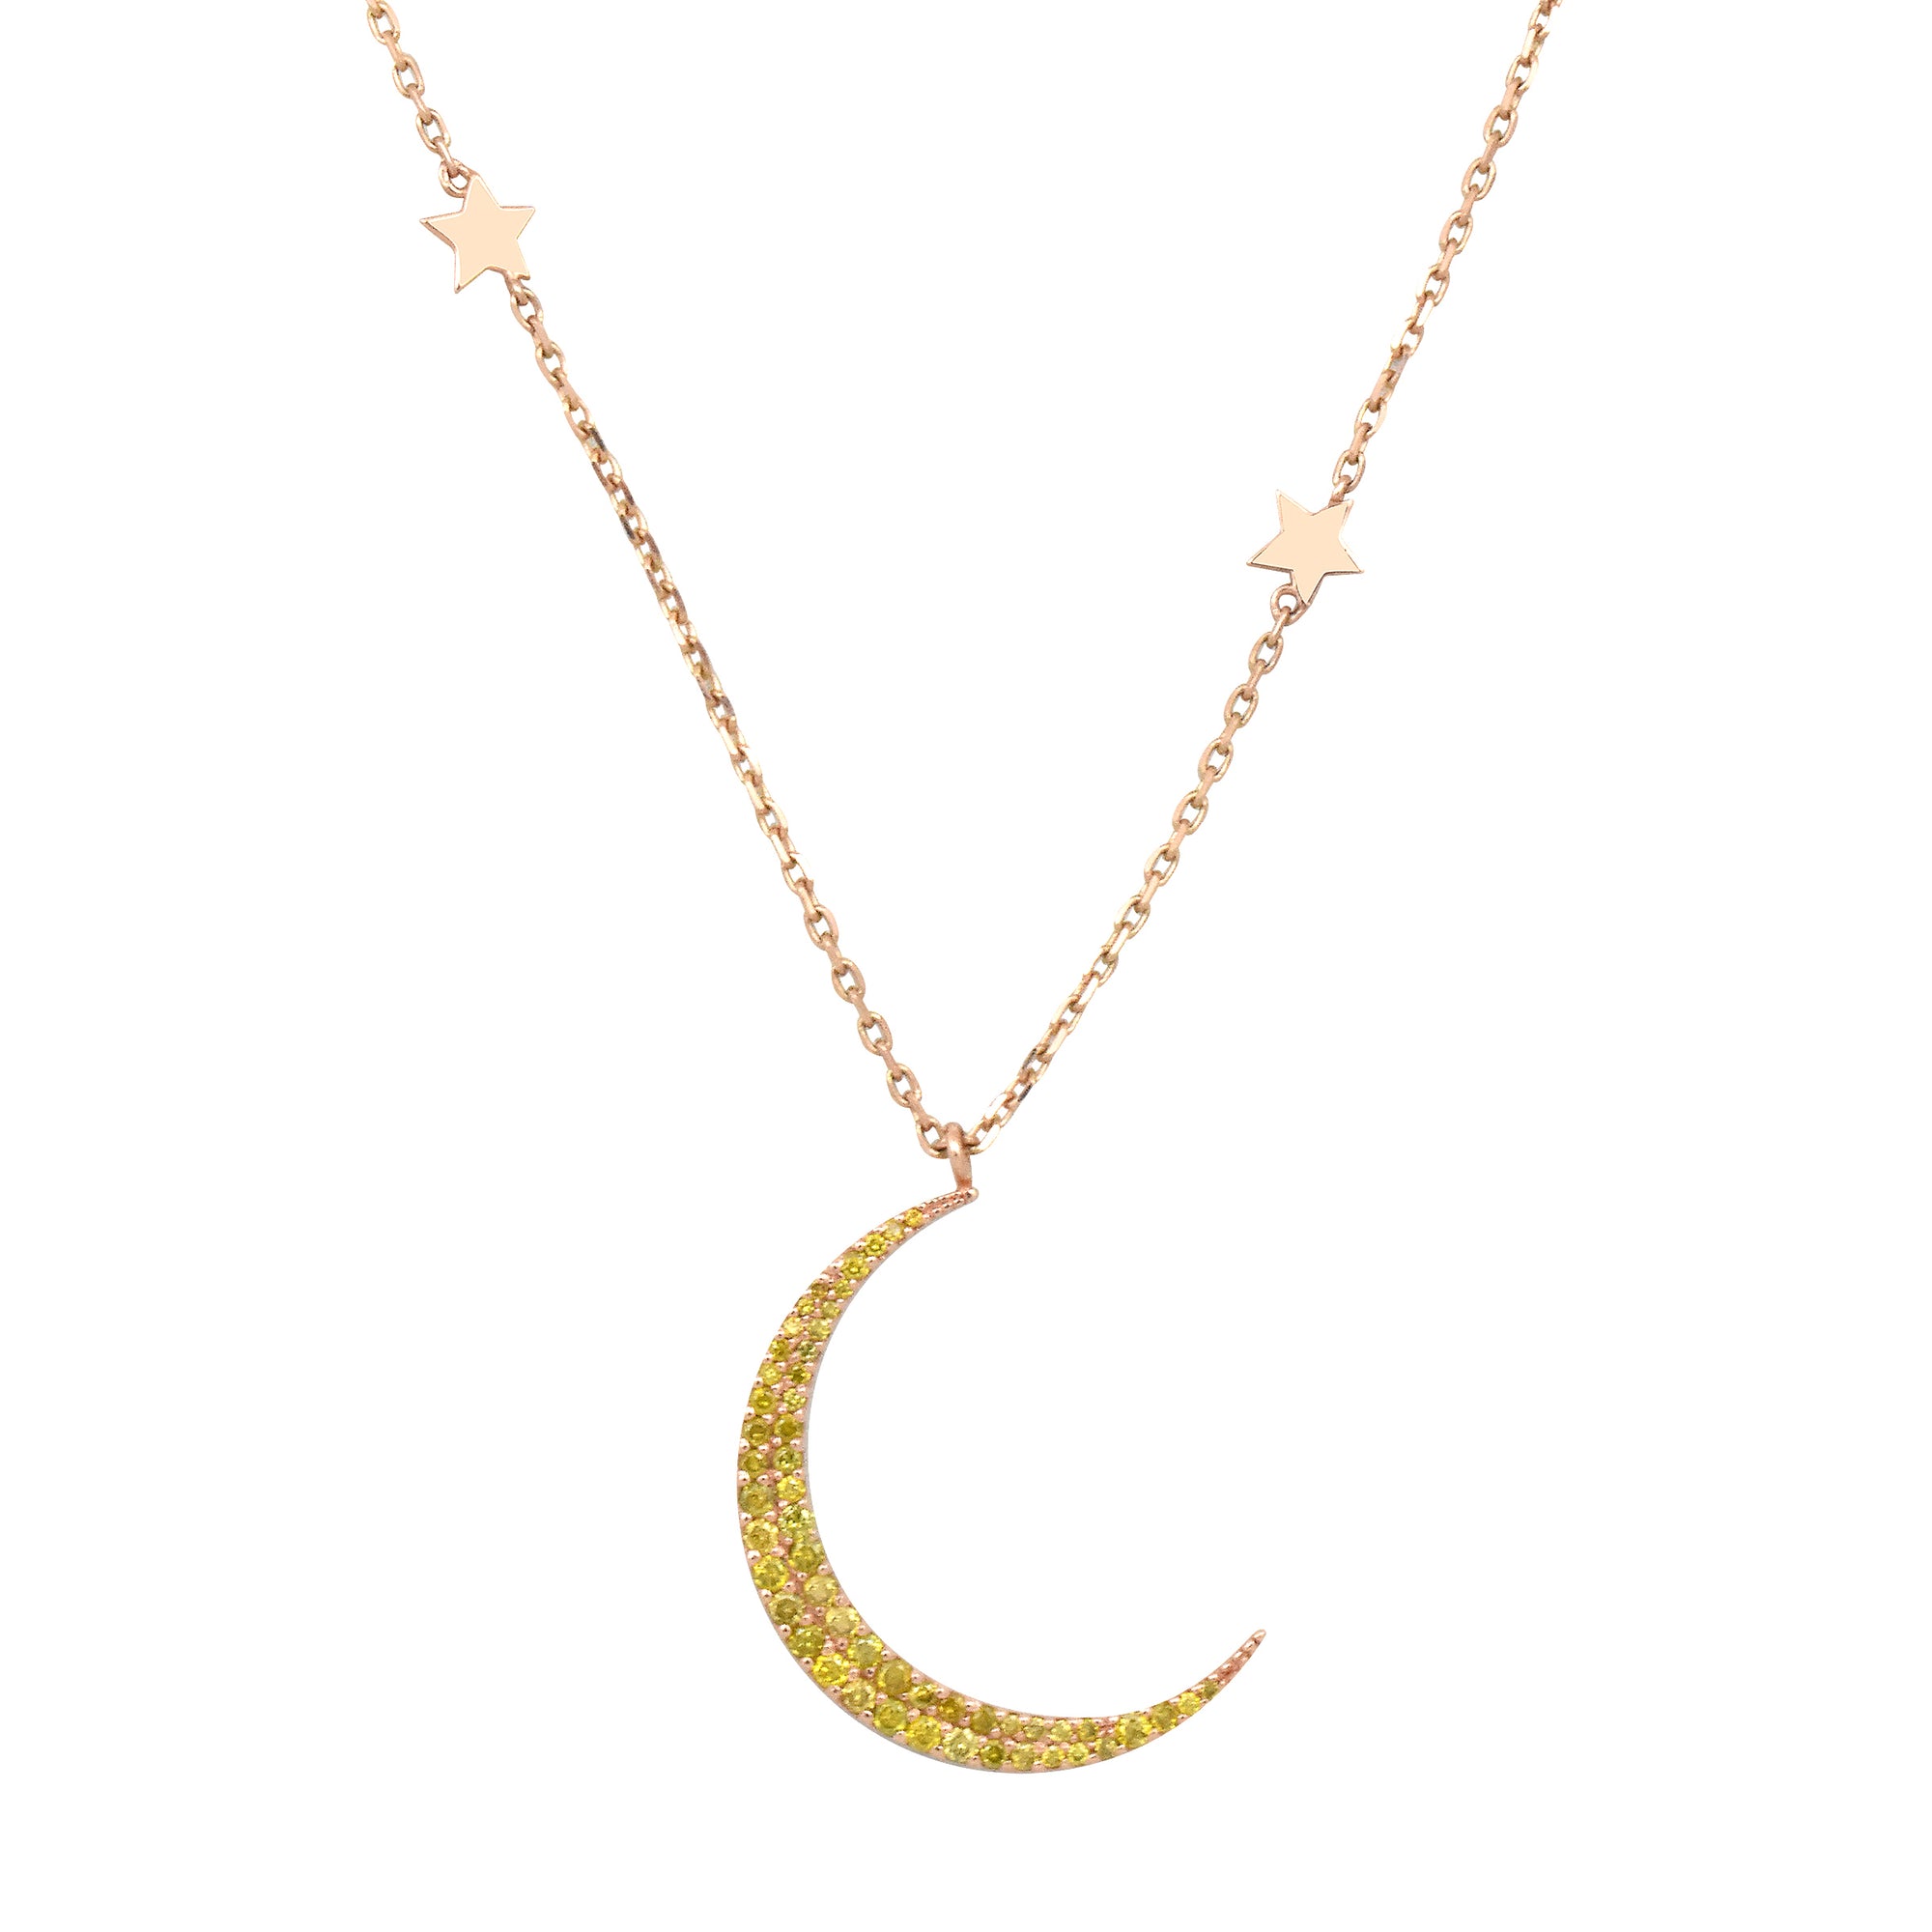 Buy Little Gold Crescent Moon Necklace // Hammered Moon Necklace //  Layering Necklace // Minimal Necklace // Boho Necklace // Half Moon Online  in India - Etsy